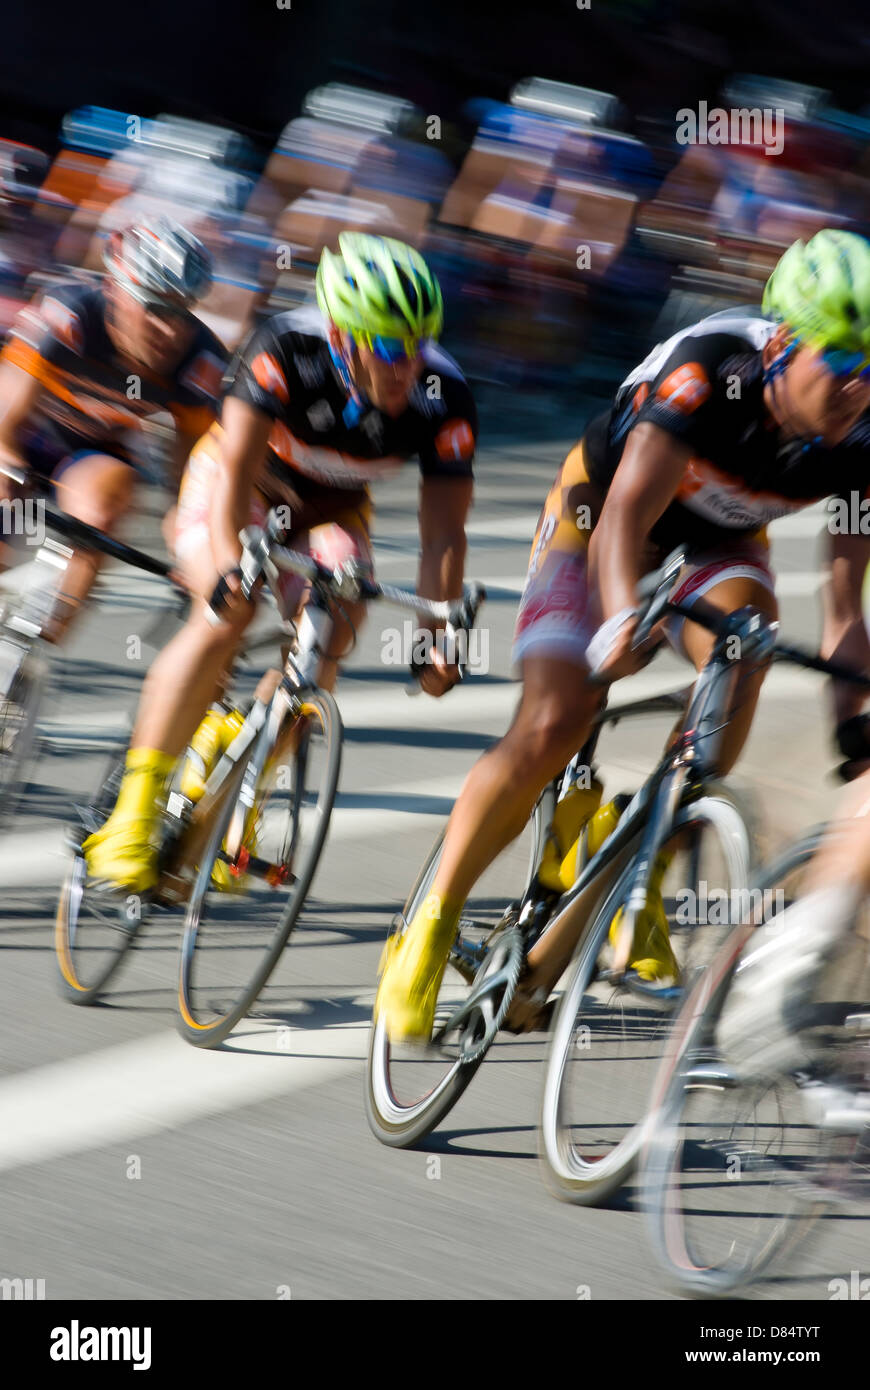 Cyclists Motion Blur Bicycle Race Racing Stock Photo